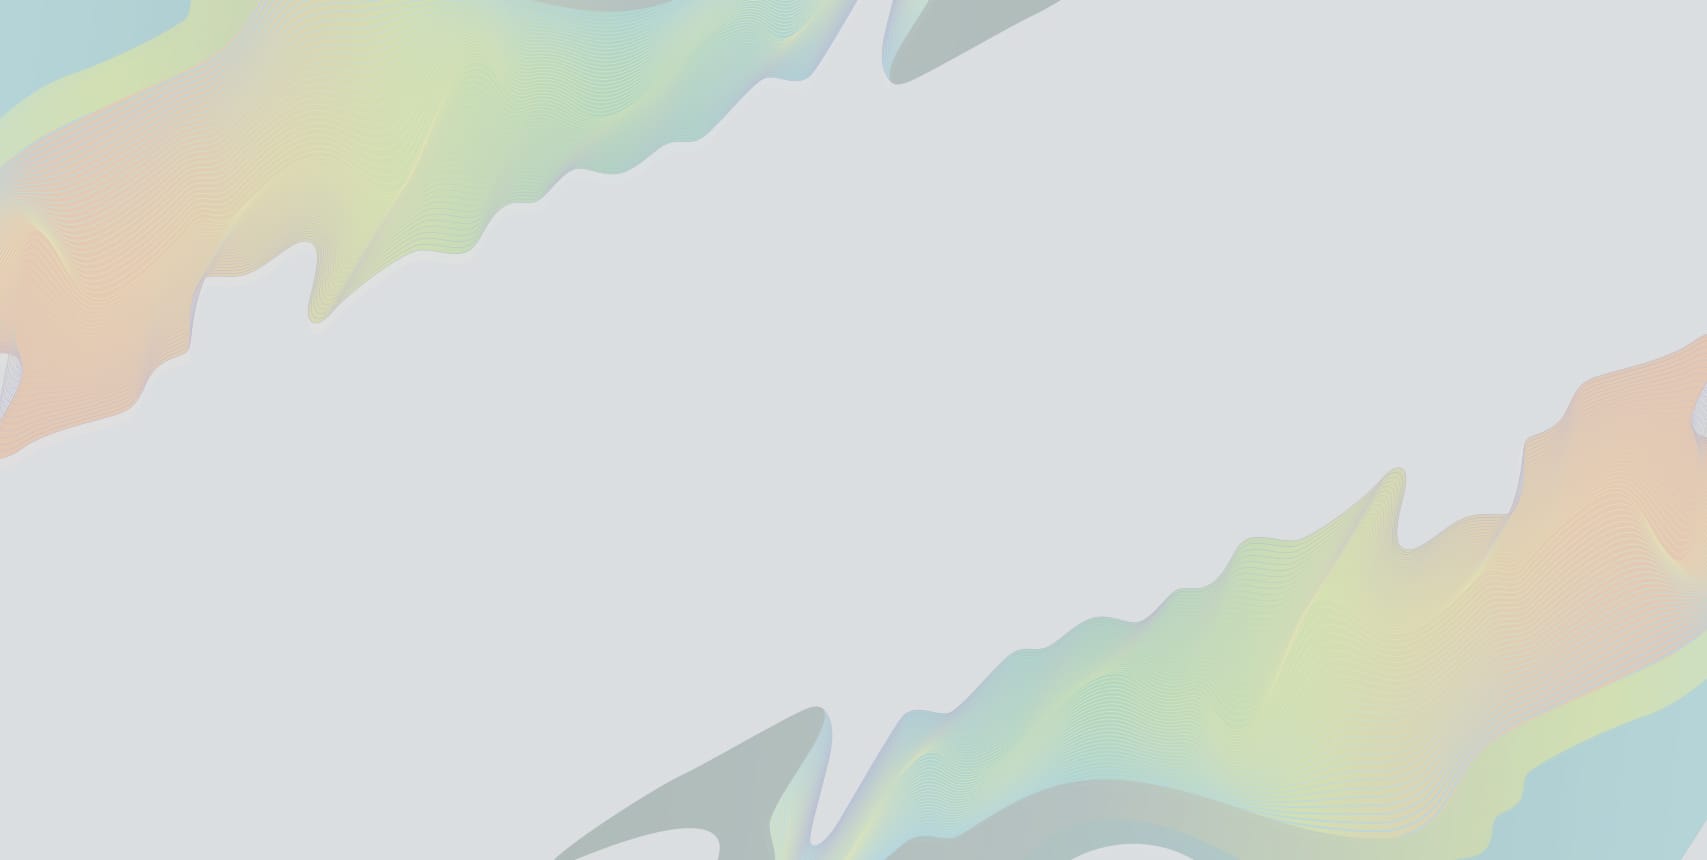 White background with splashes of pastel blue, green, yellow, purple, orange and gray in the upper left and lower right corners